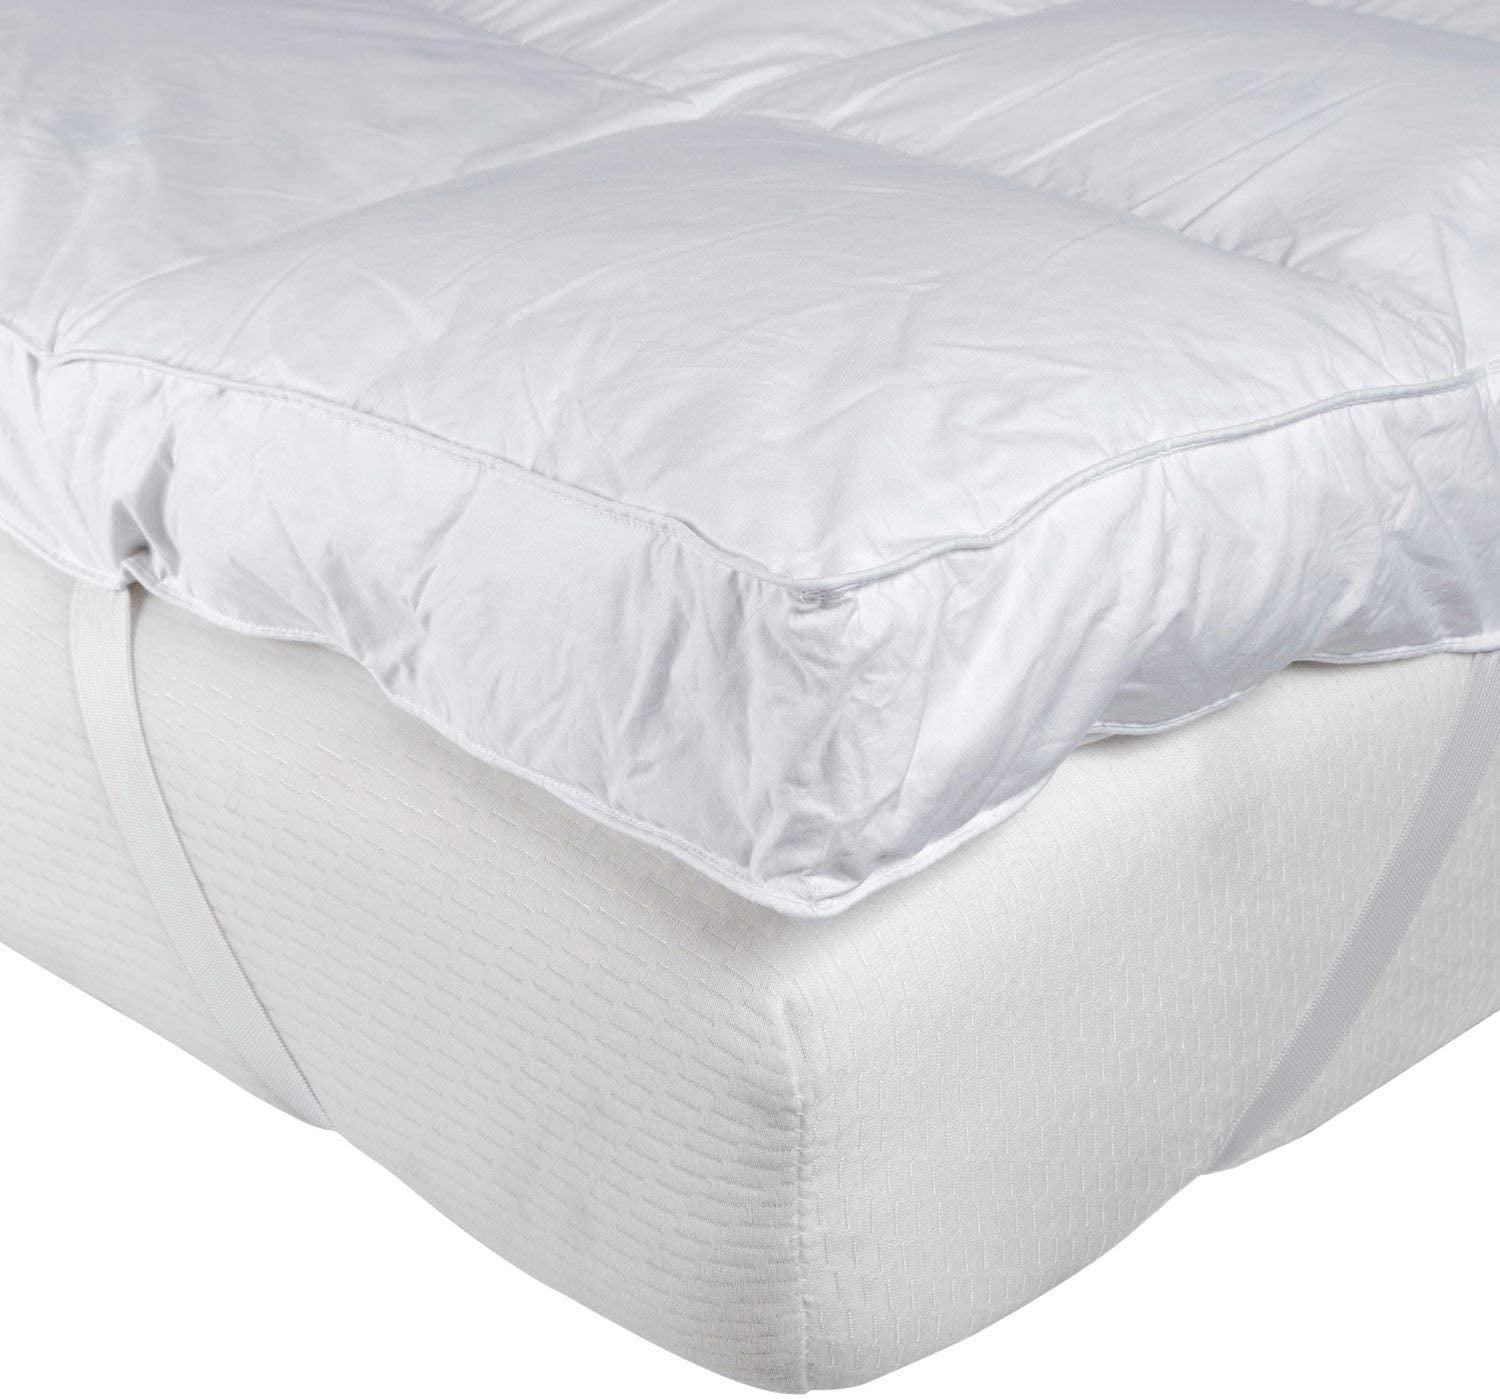 10cm 4" Inch Mattress Topper Double Bed Size